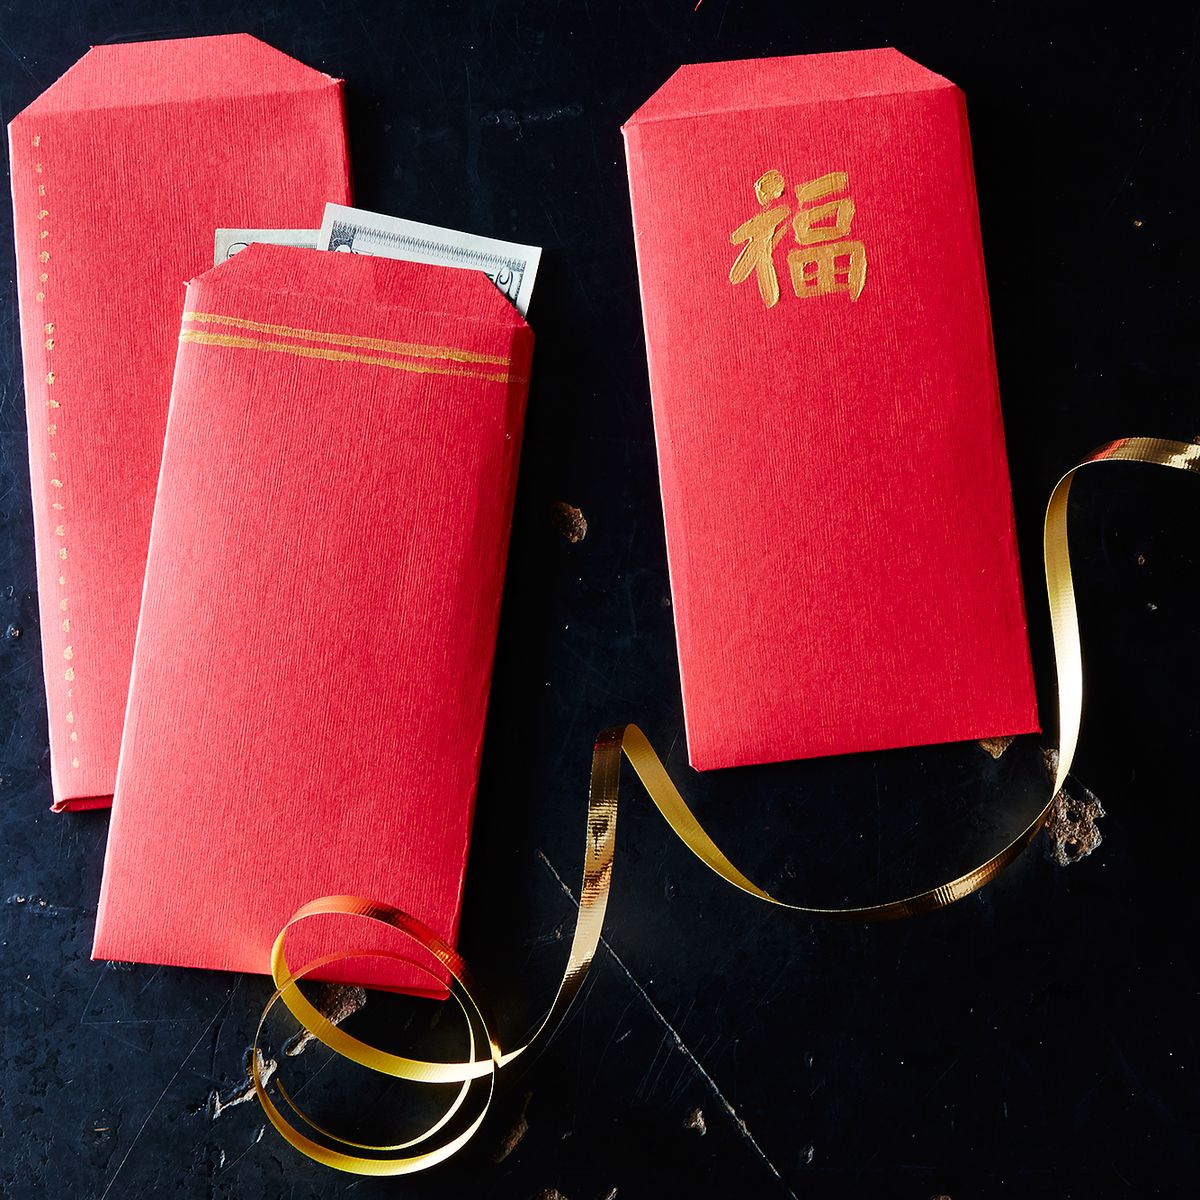 Chinese New Year Money In Red Envelopes Gift Stock Photo